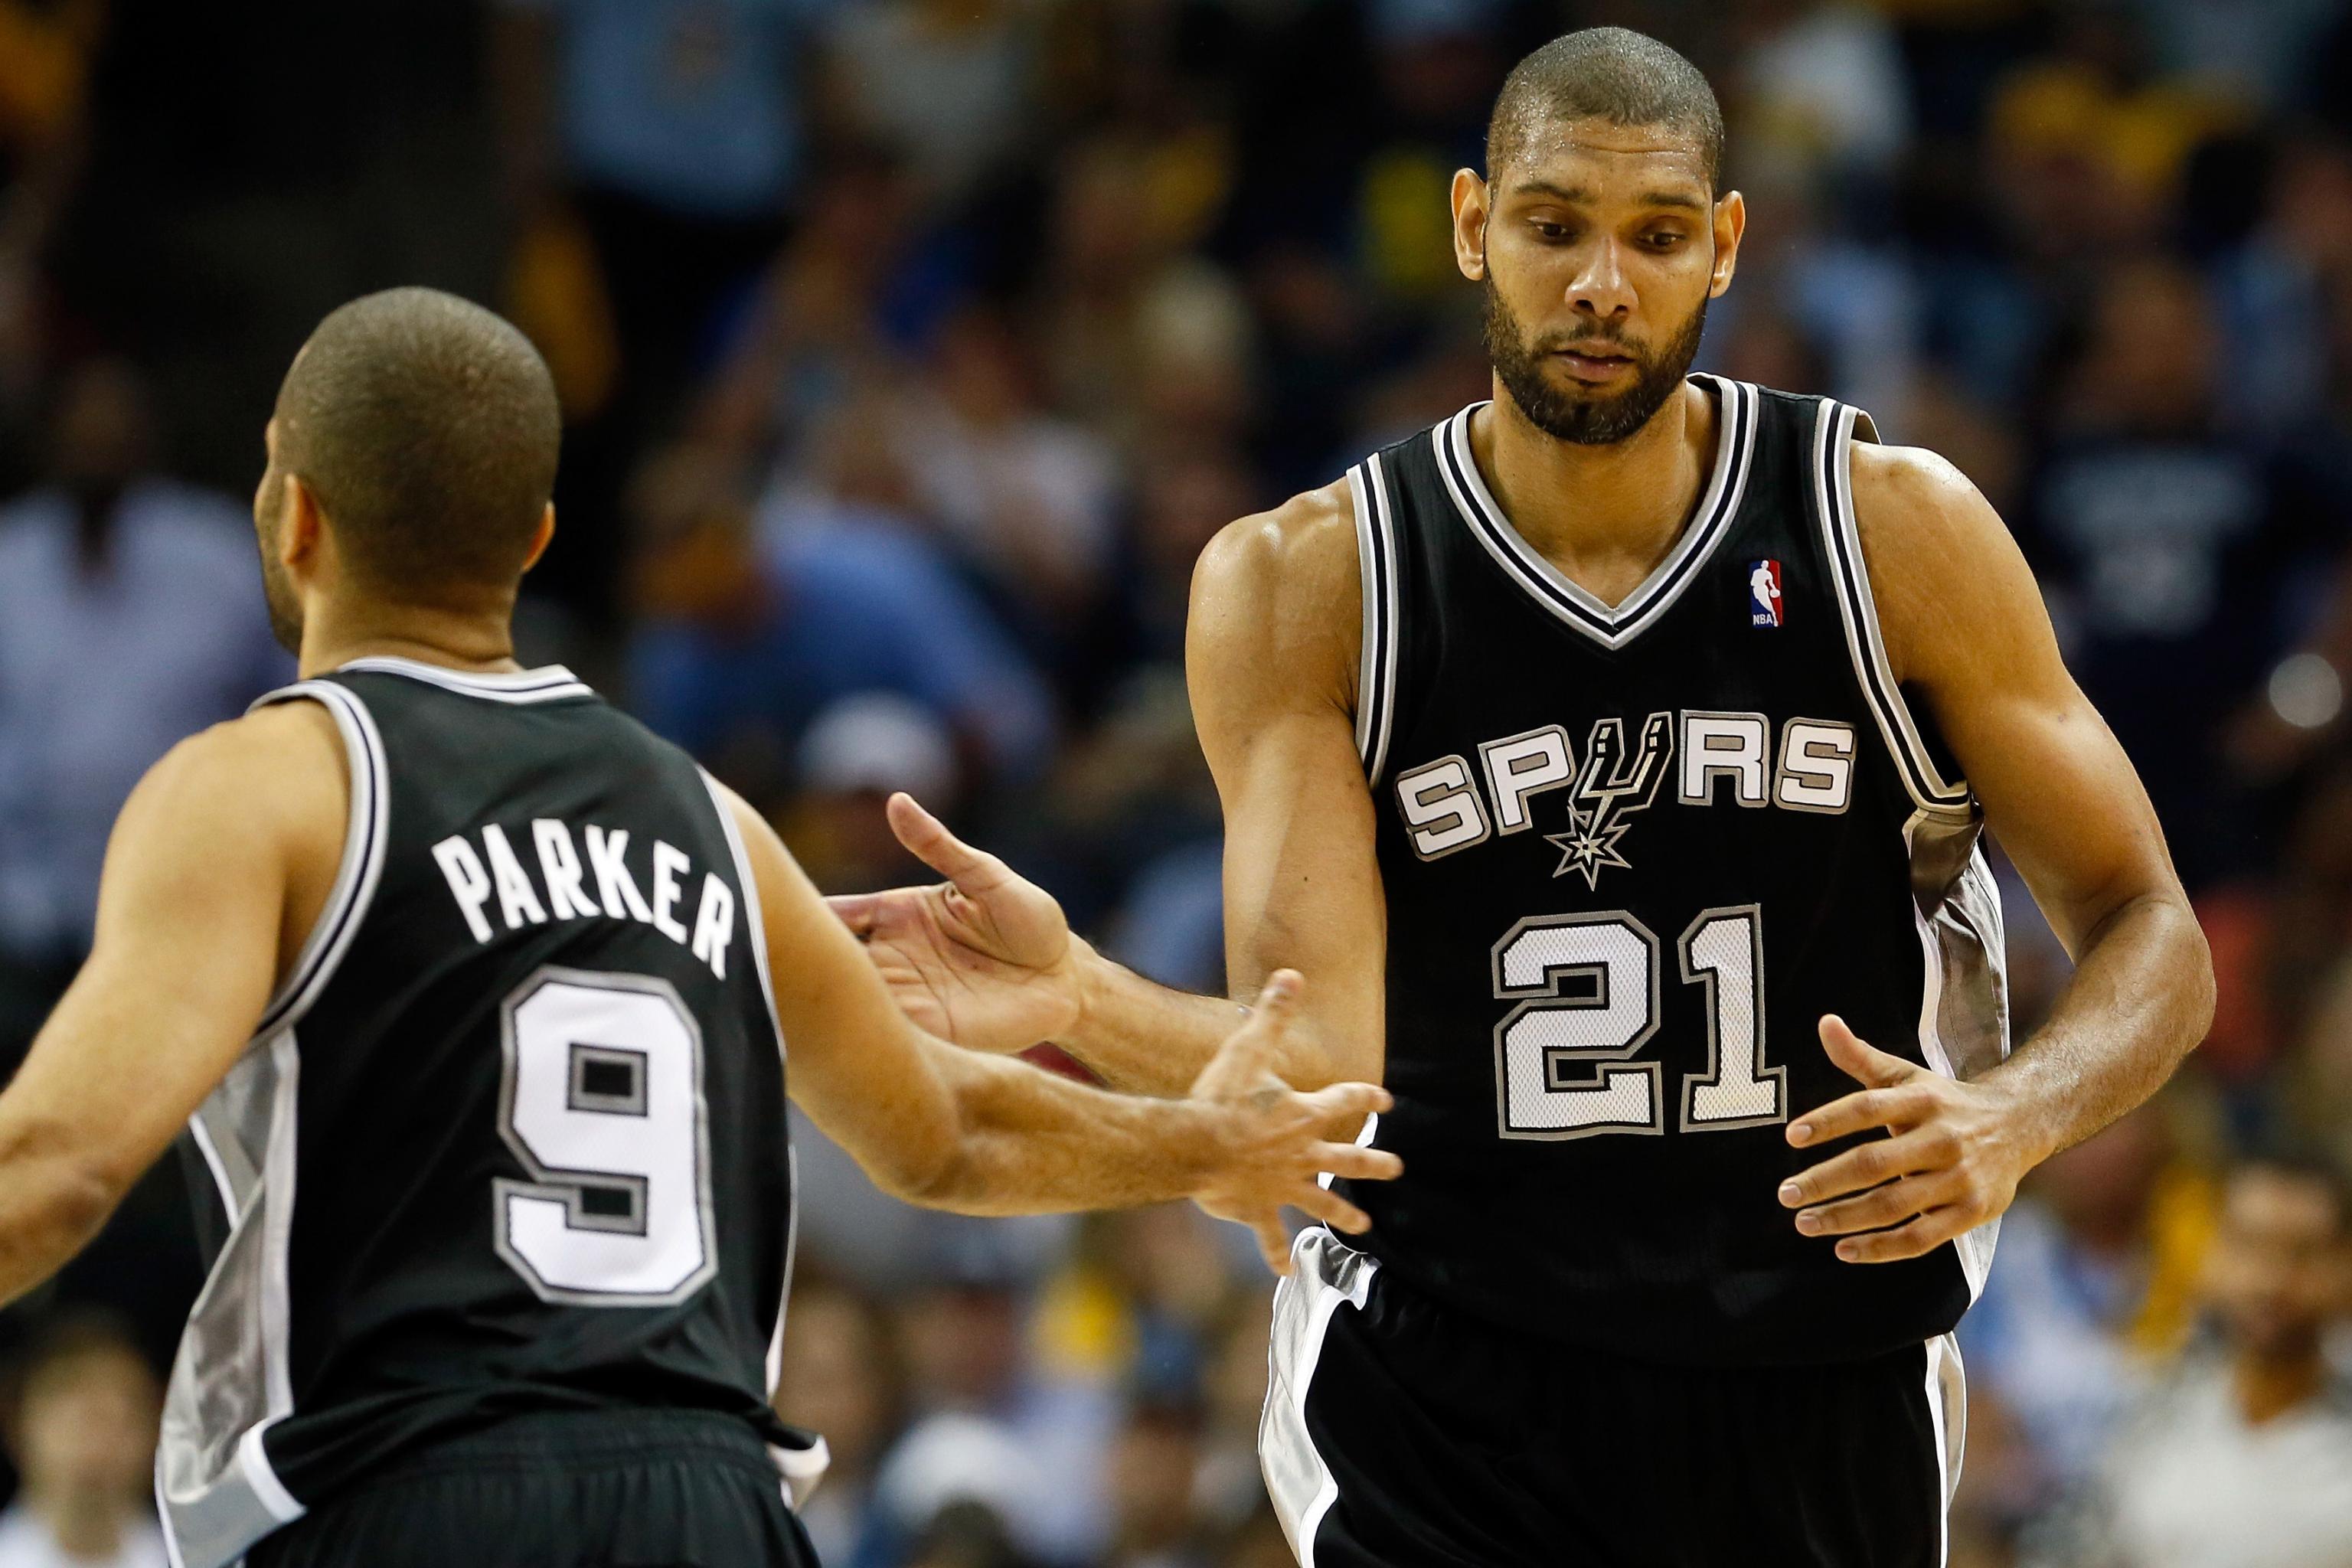 Spurs put end to Grizzlies' comeback